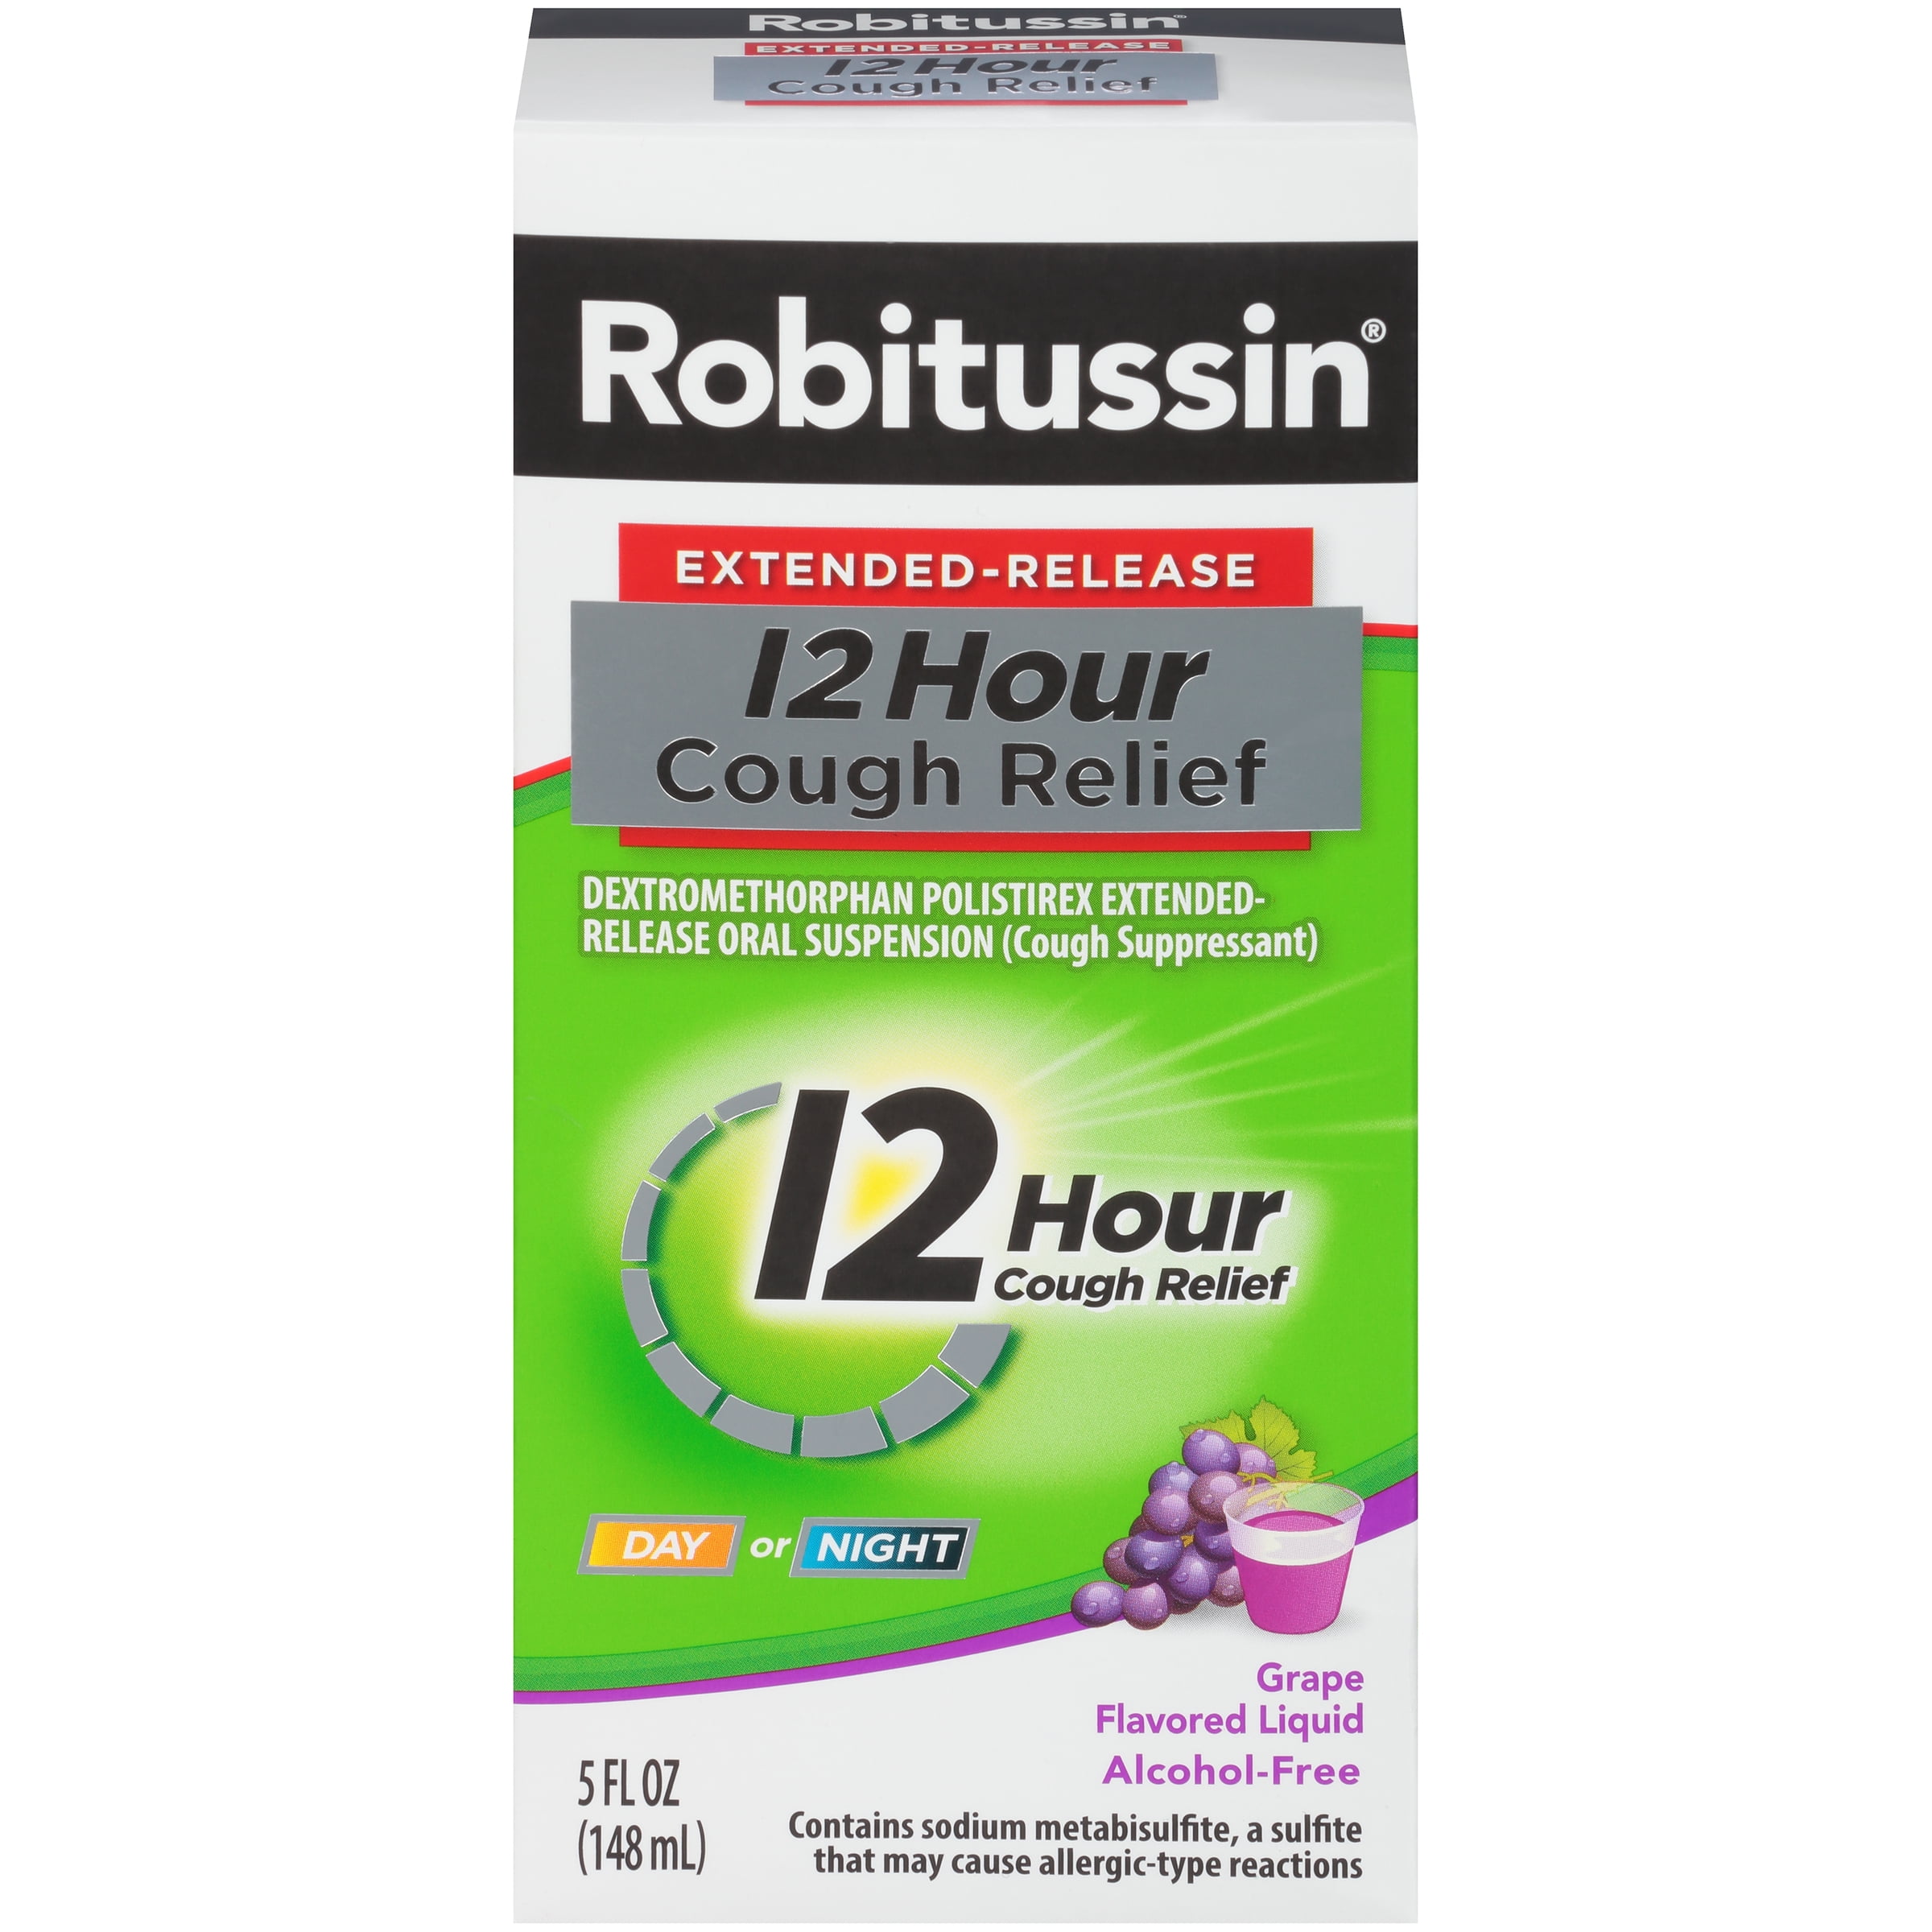 Robitussin ExtendedRelease 12 Hour Cough Relief Grape Flavored Liquid